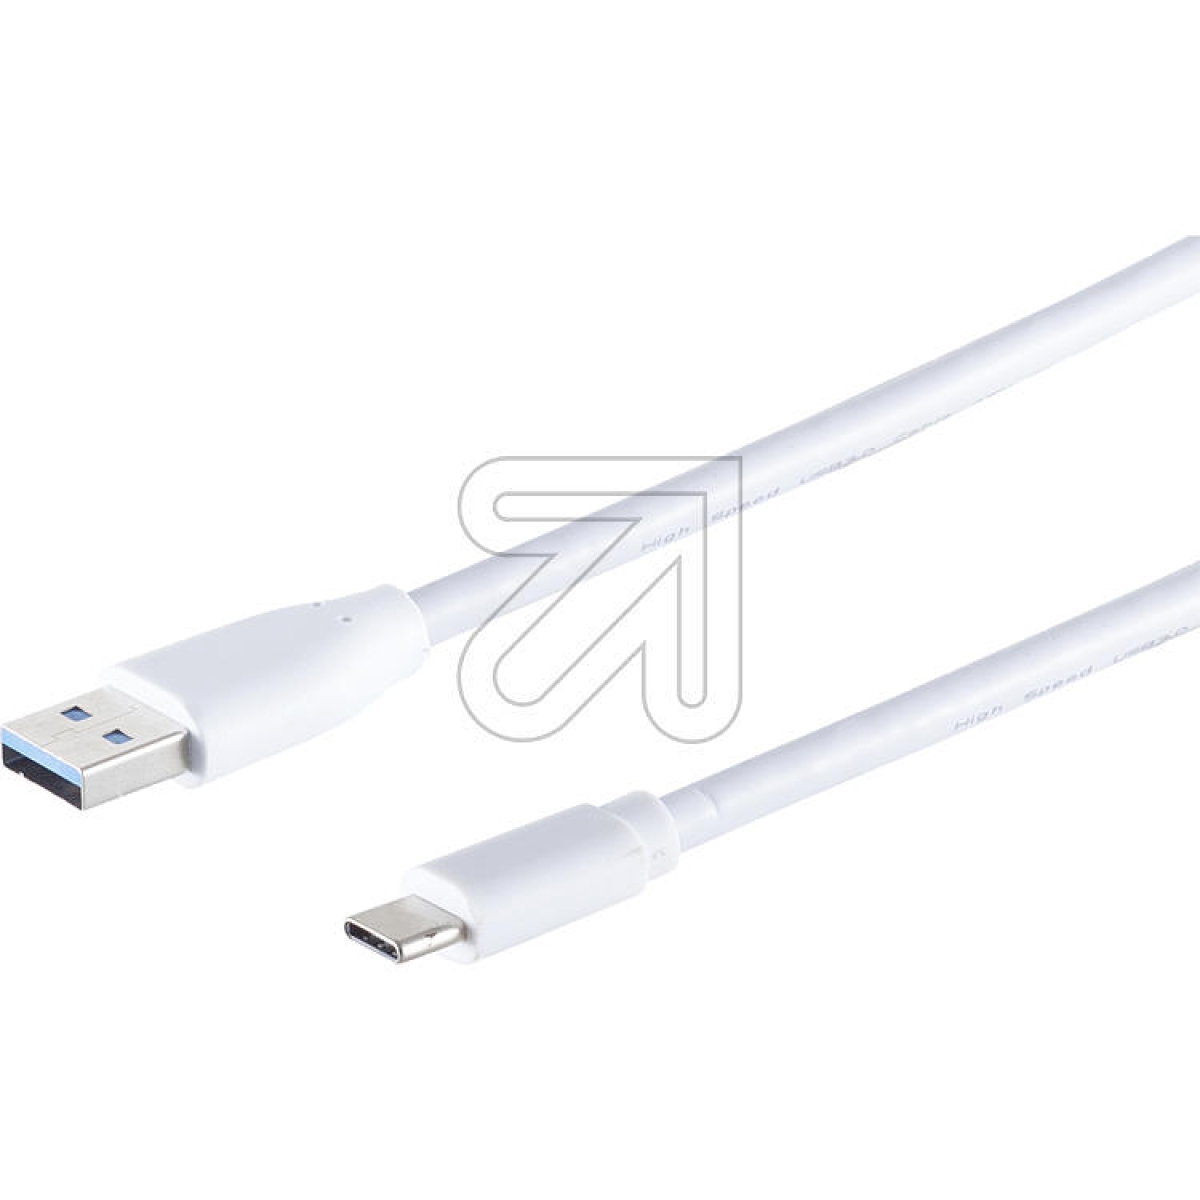 S-ConnUSB cable, USB 3.0 A to USB 3.1 type C, white, 3m 13-31046